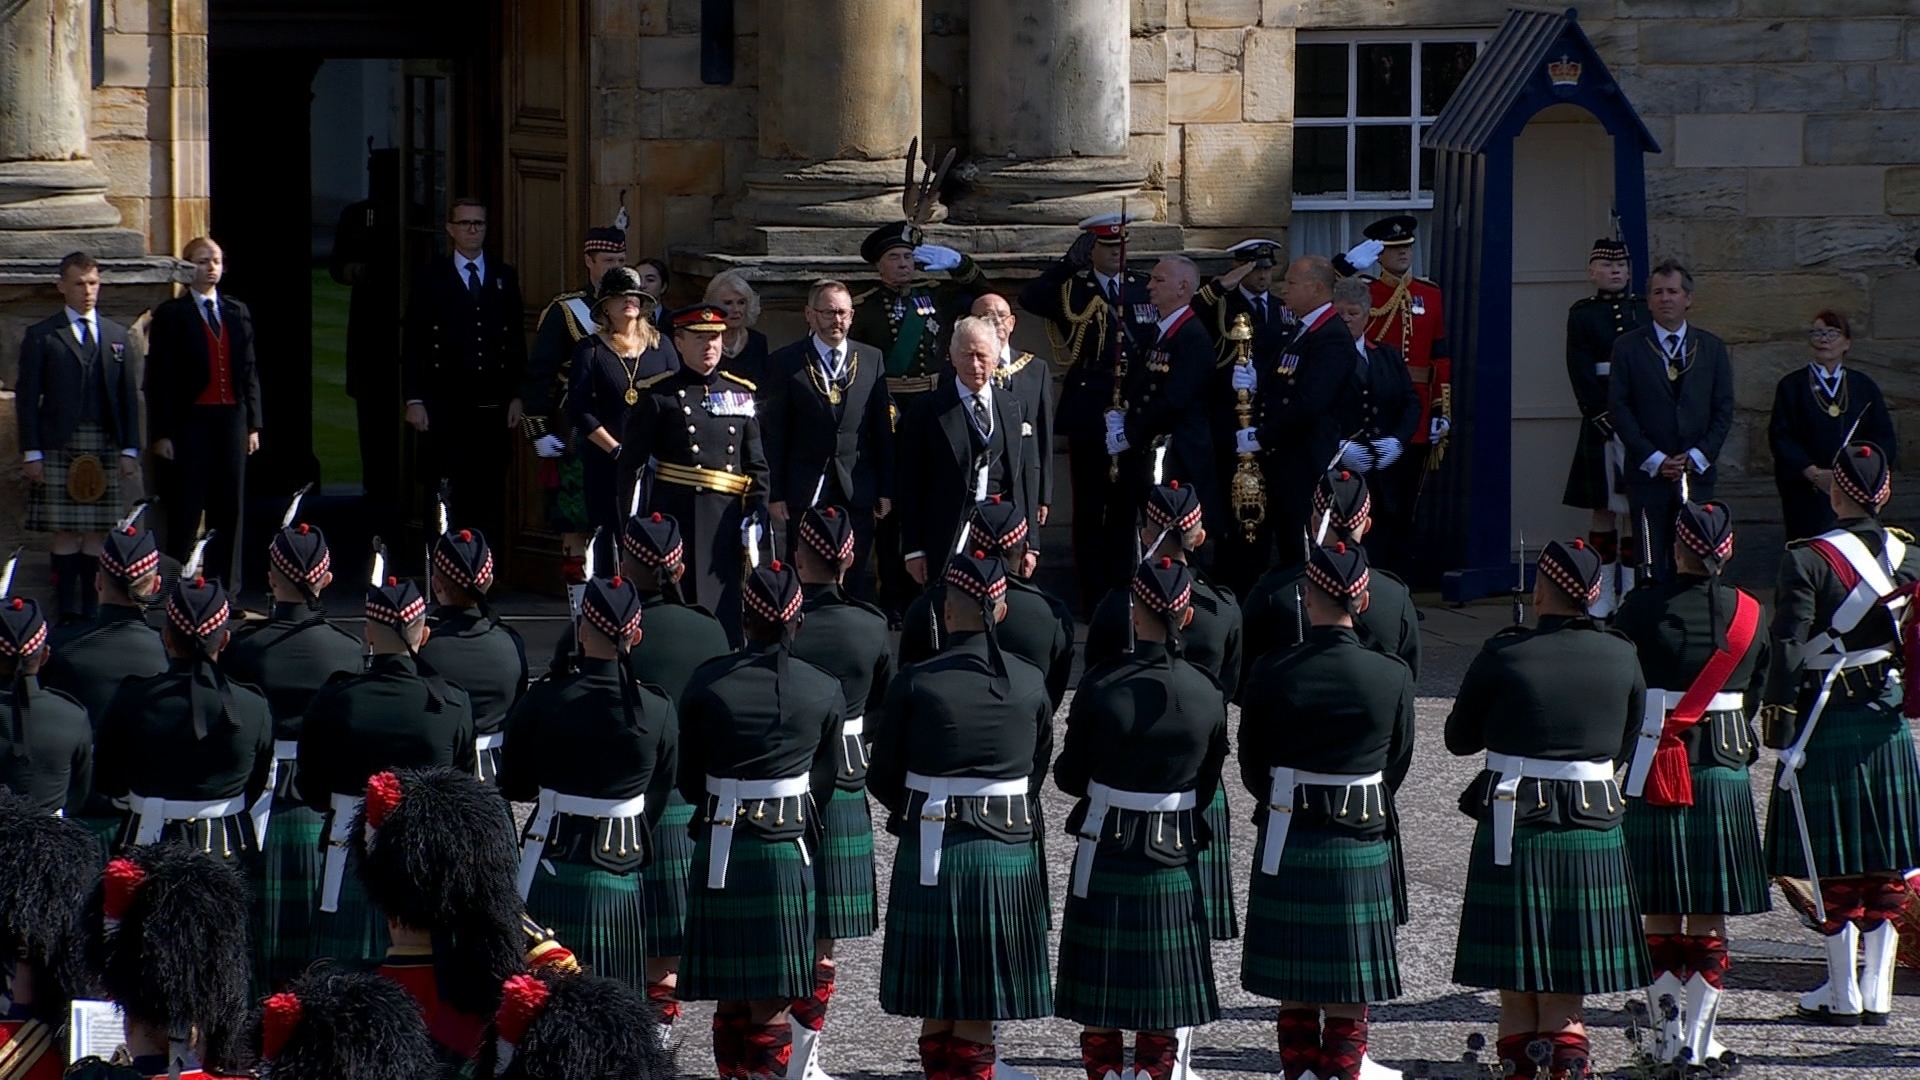 King Charles III will take part in the procession